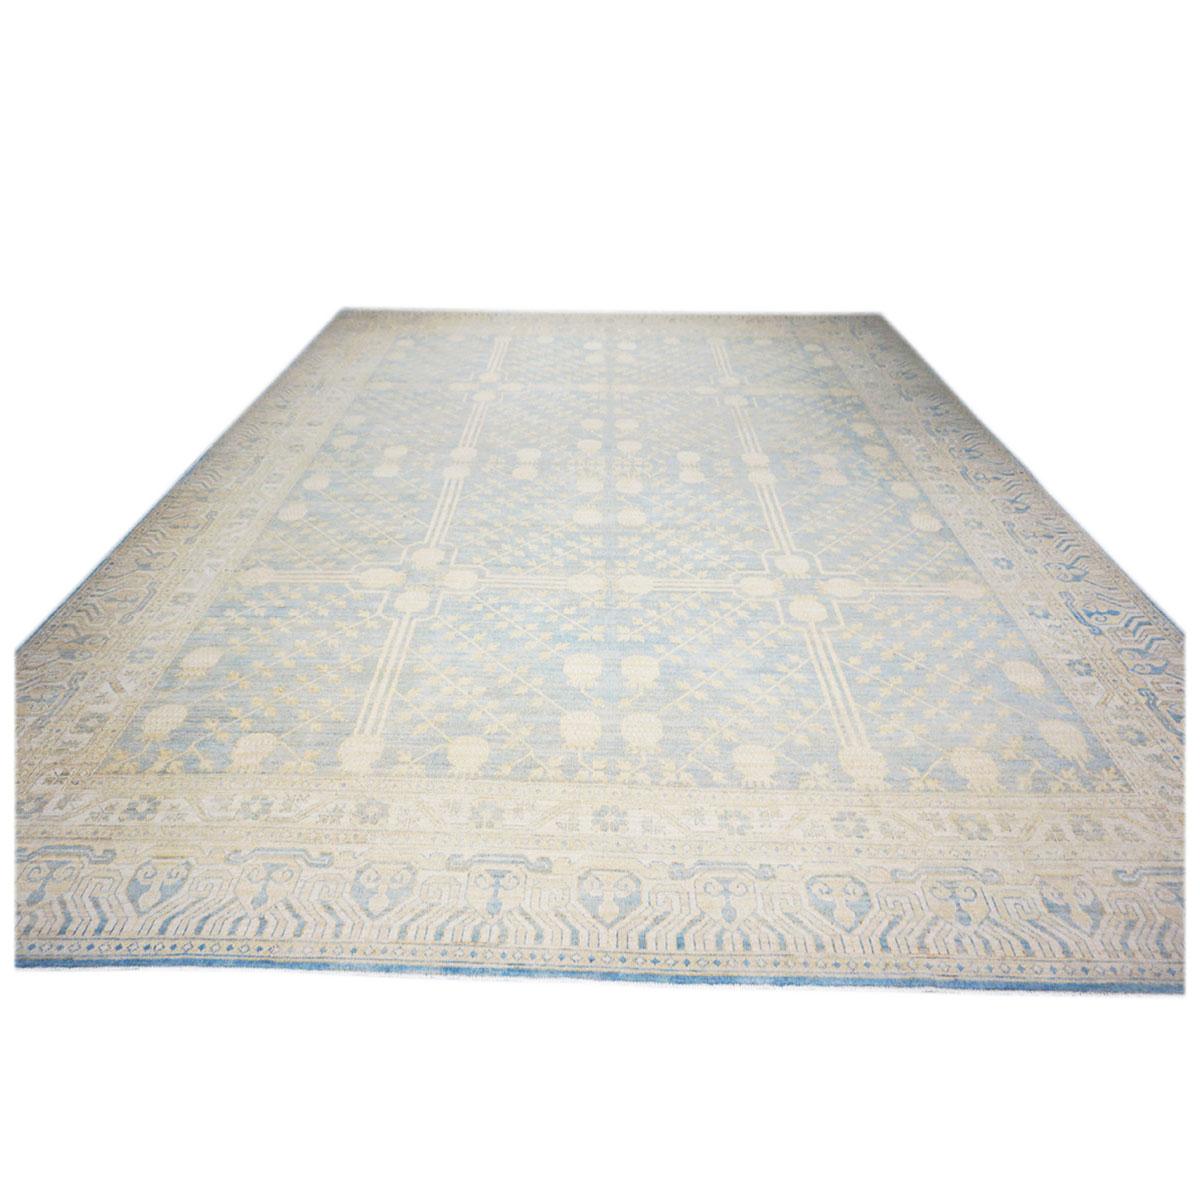 This 21st Century Afghan Khotan Wool Handwoven 11x14 Ivory & Light Blue rug is made of 100% hand-twisted wool fibers which were vegetable dyed with subtle colors. The background is light blue and the design, details, and border include light blue,